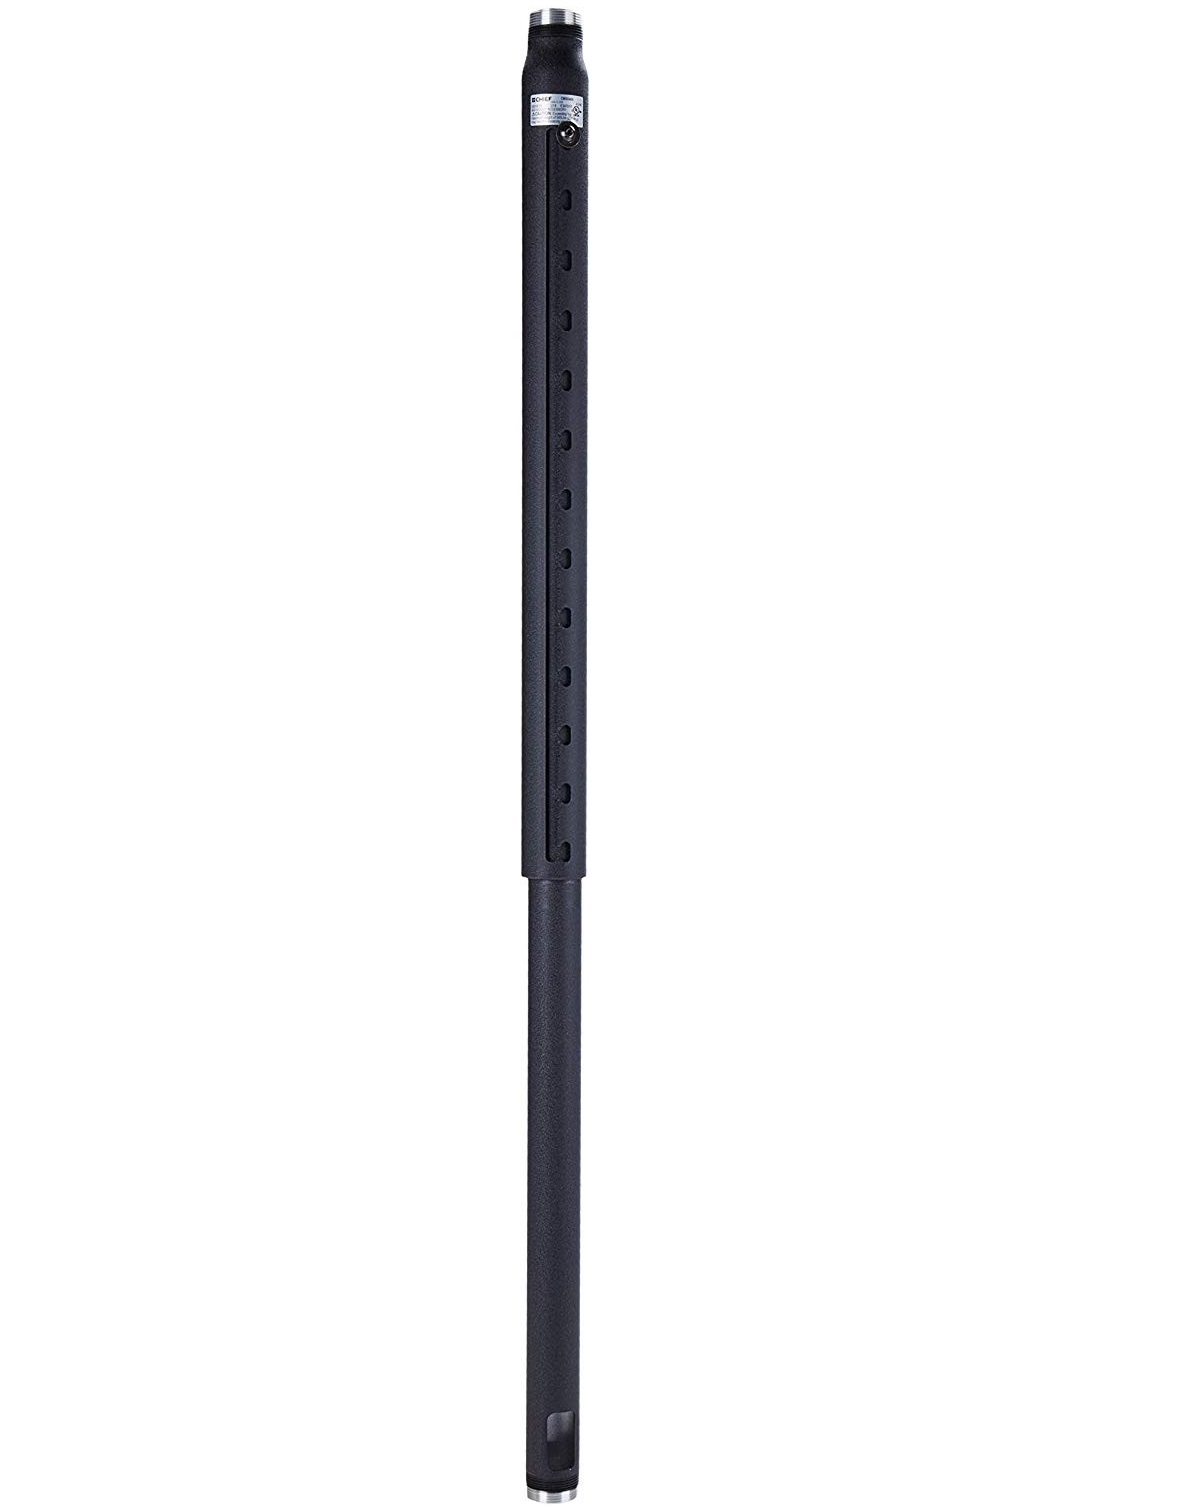 Chief Manufaturing CMS0406 4-6' Speed-Connect Adjustable Extension Column Black